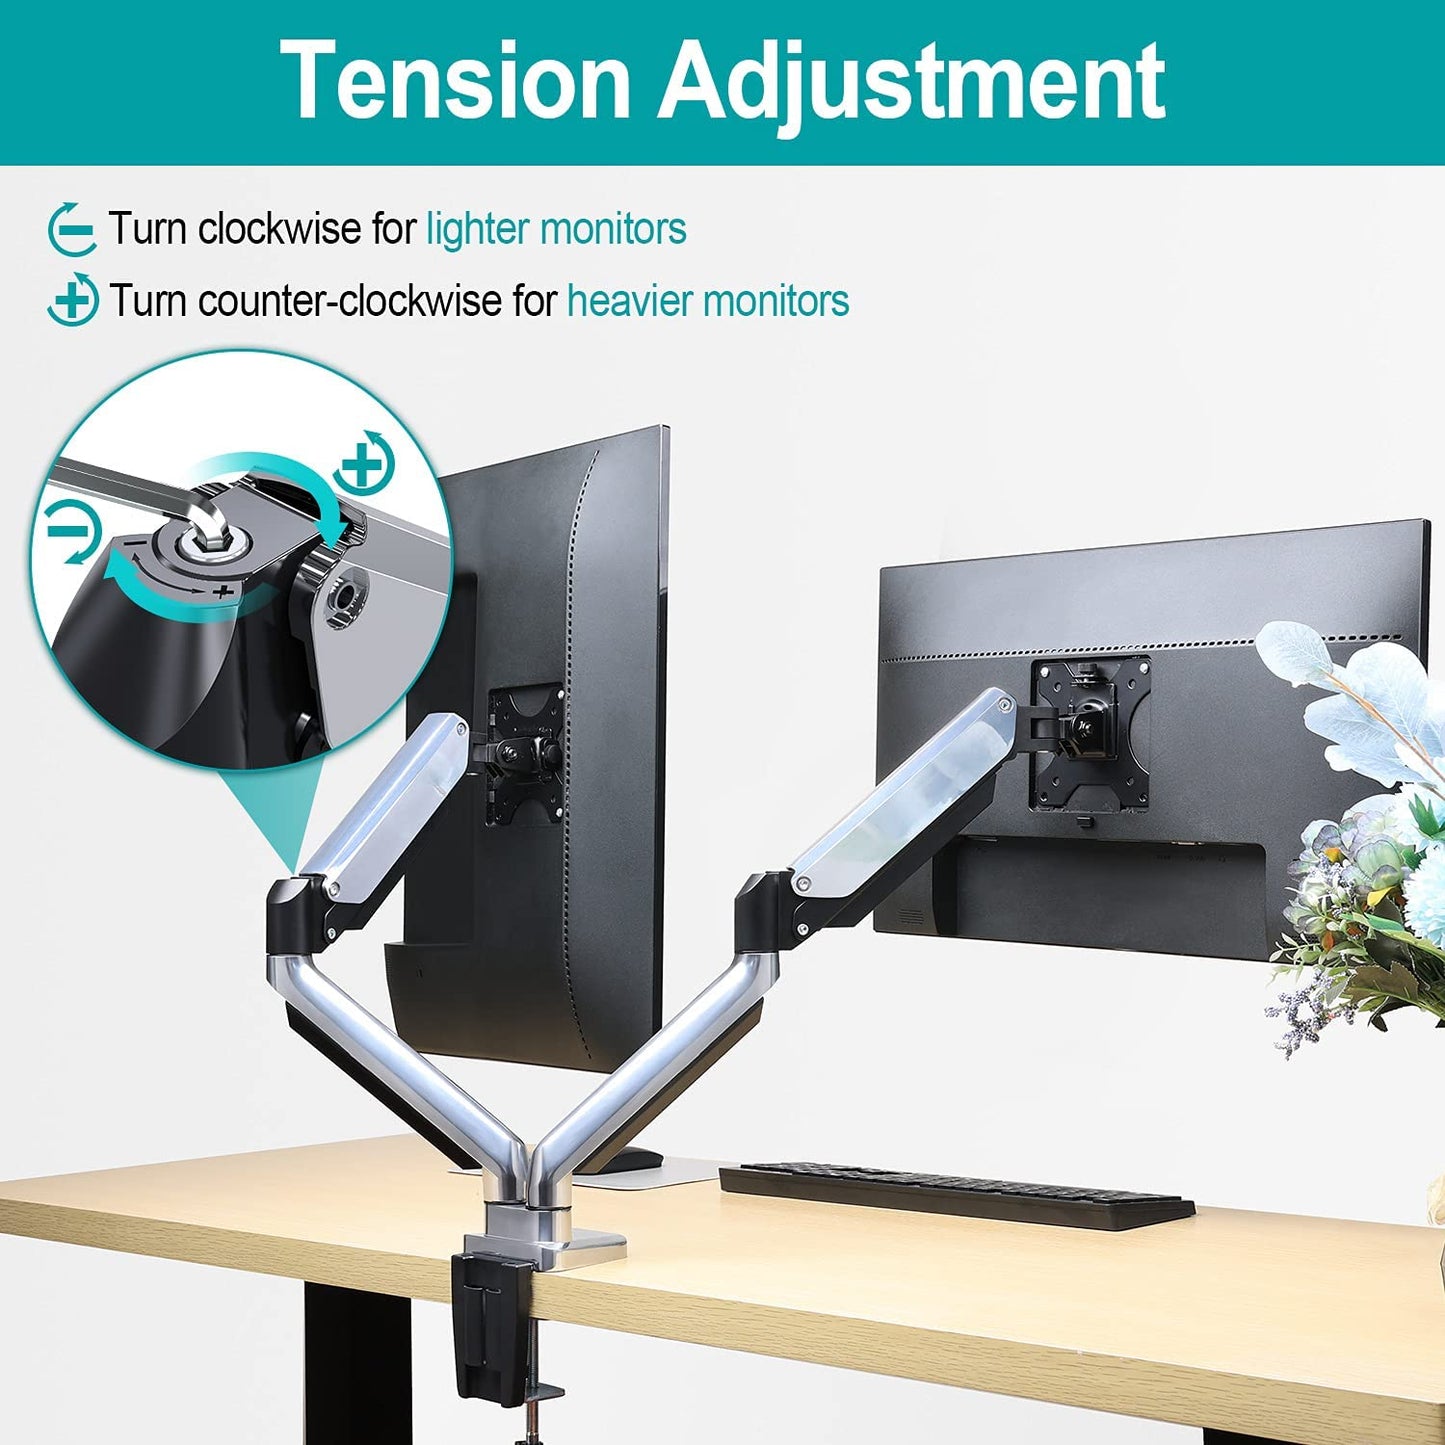 Dual Arms dual monitor arm desk mount with gas spring for effortless adjustment